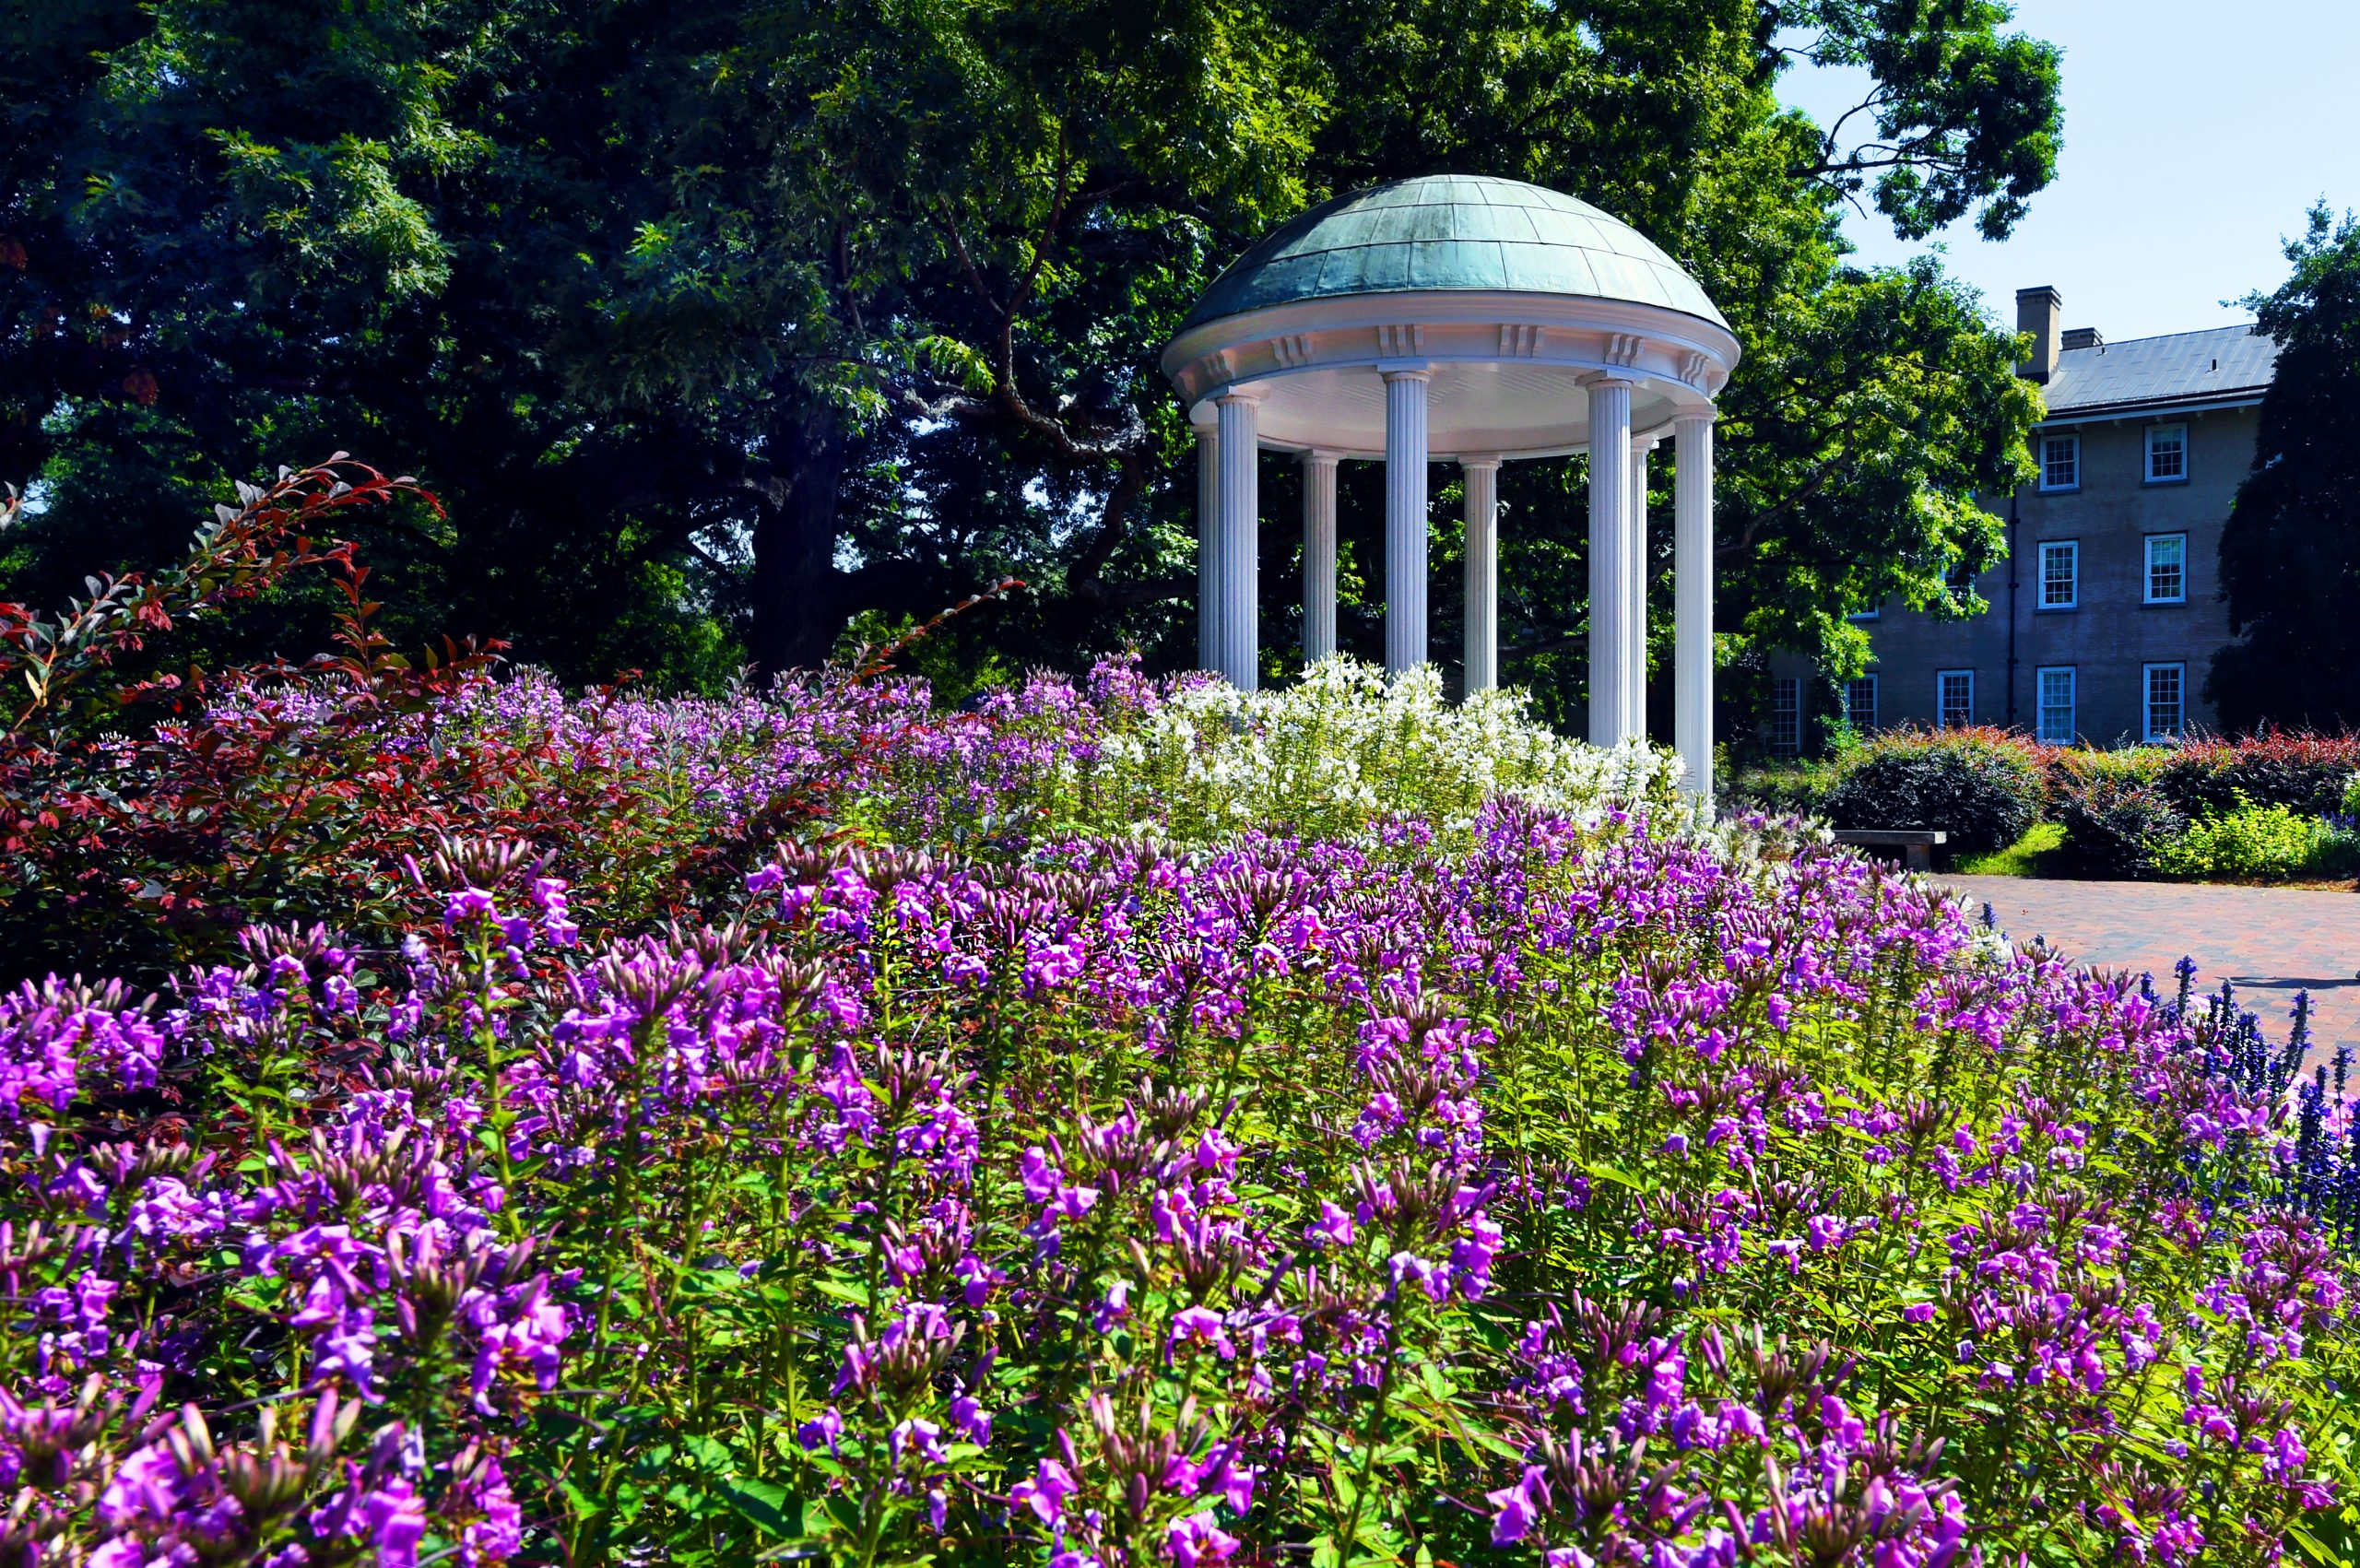 Old Well with summer flowers in front.